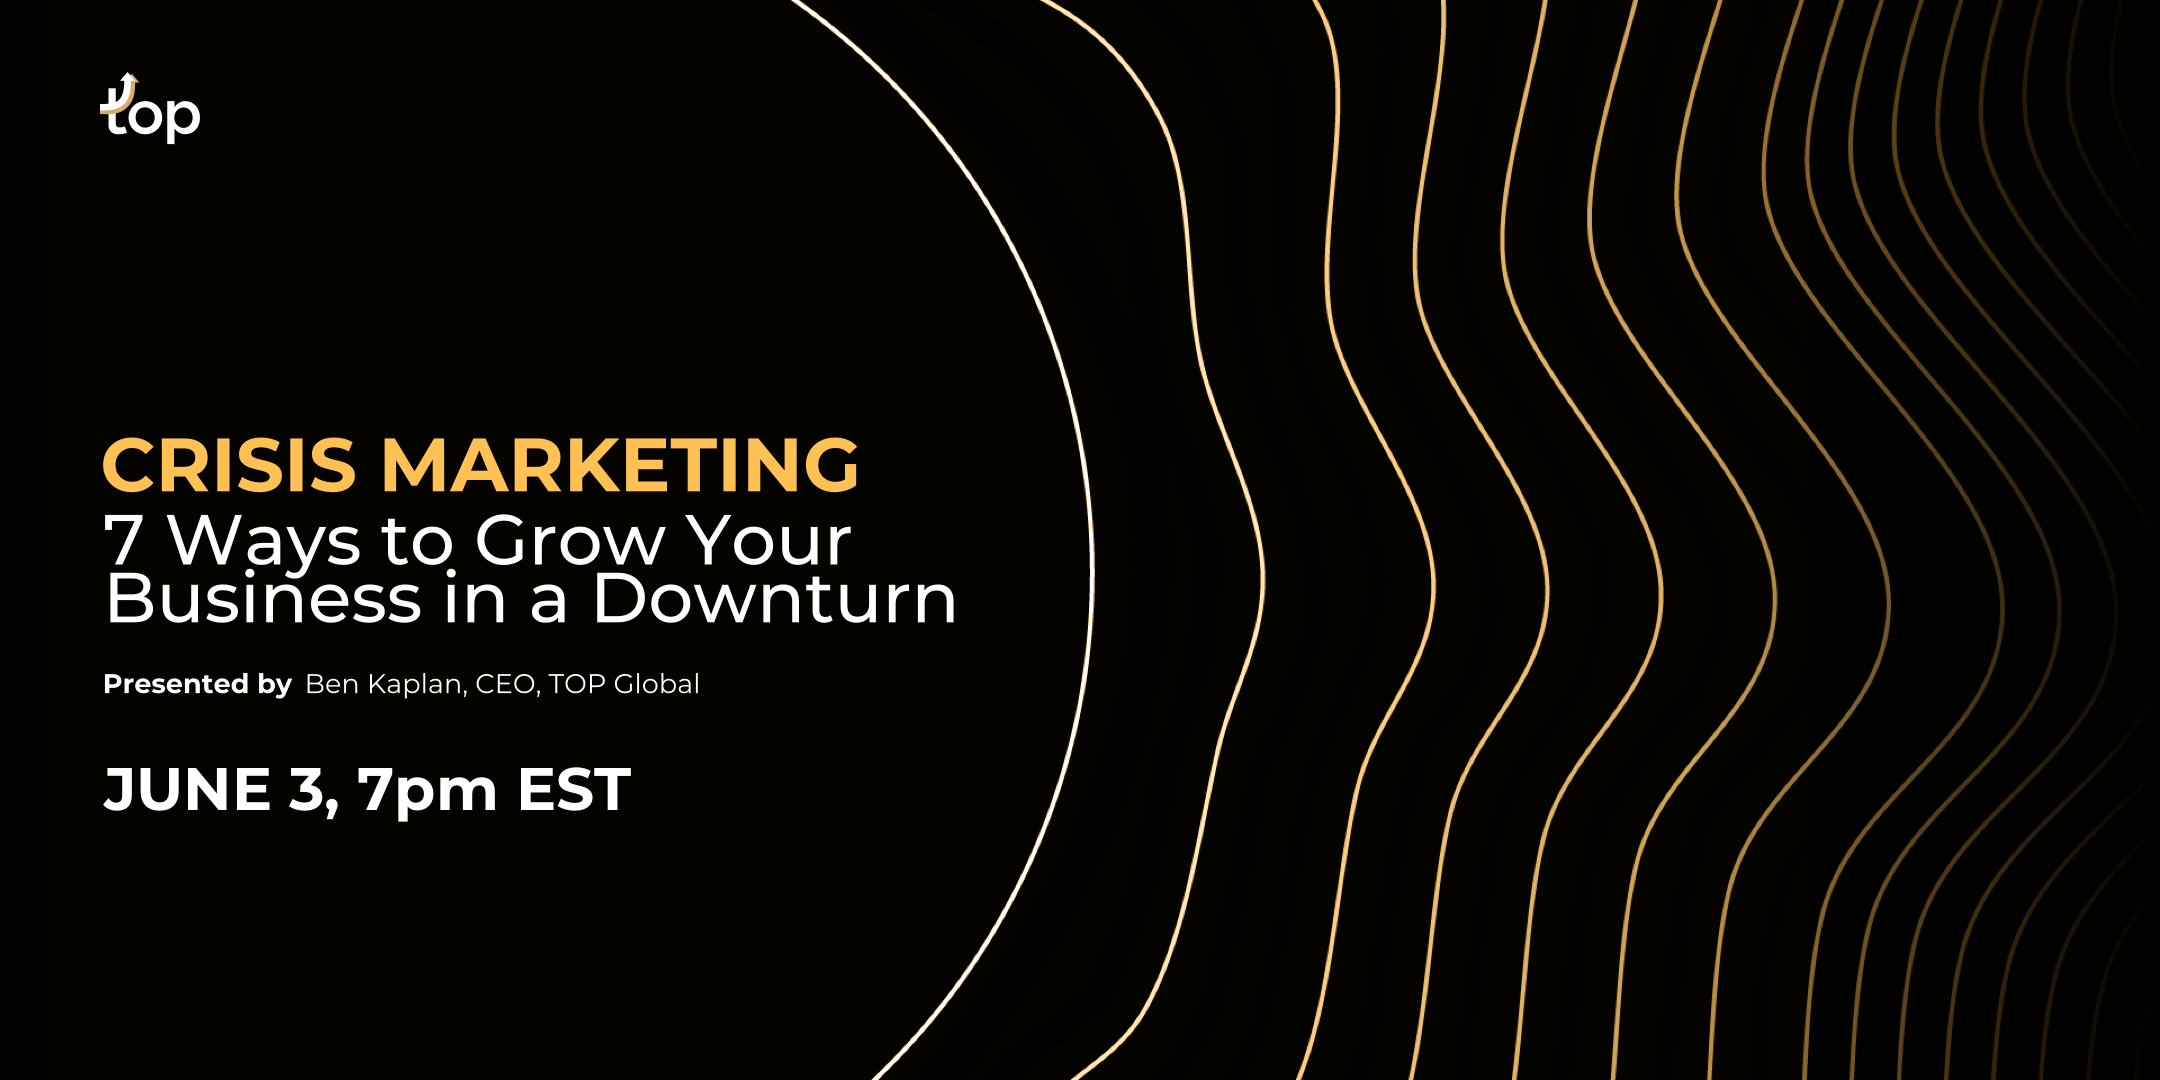 Crisis Marketing: 7 Ways to Grow Your Business in a Downturn (DAL)